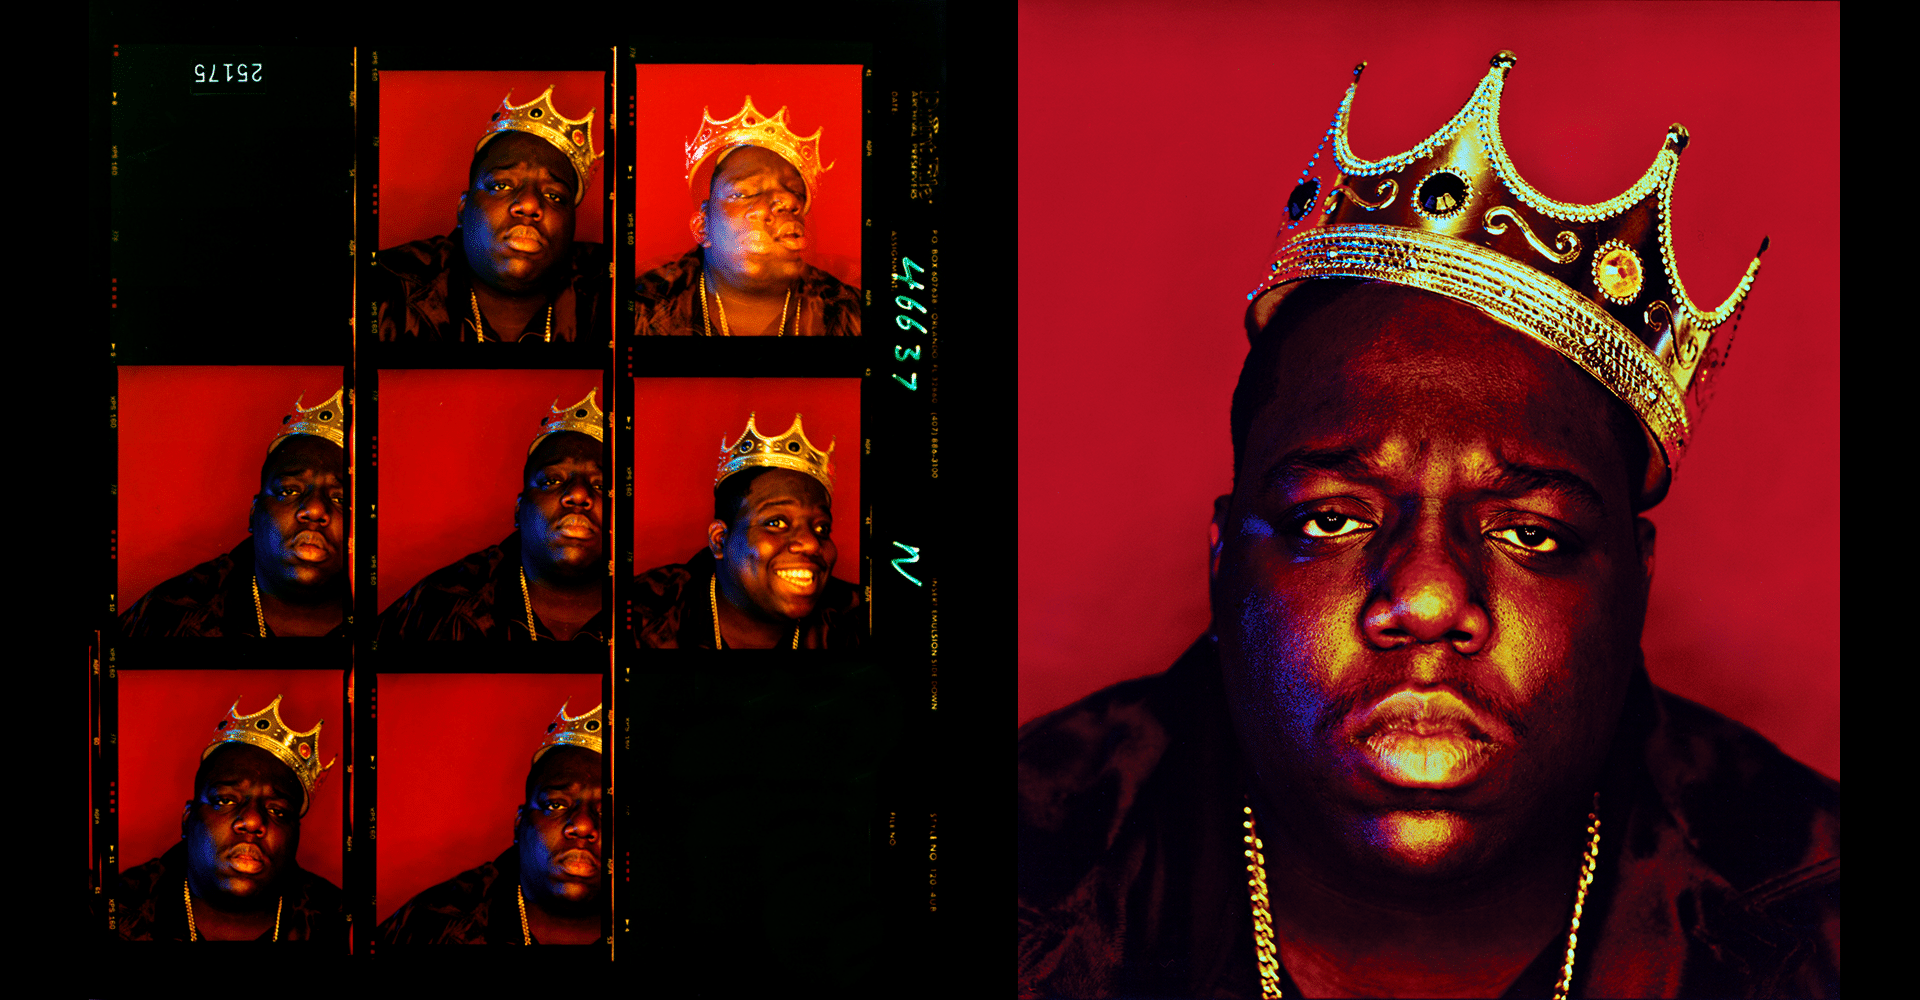 “King of New York” Portrait Session with Barron Claiborne